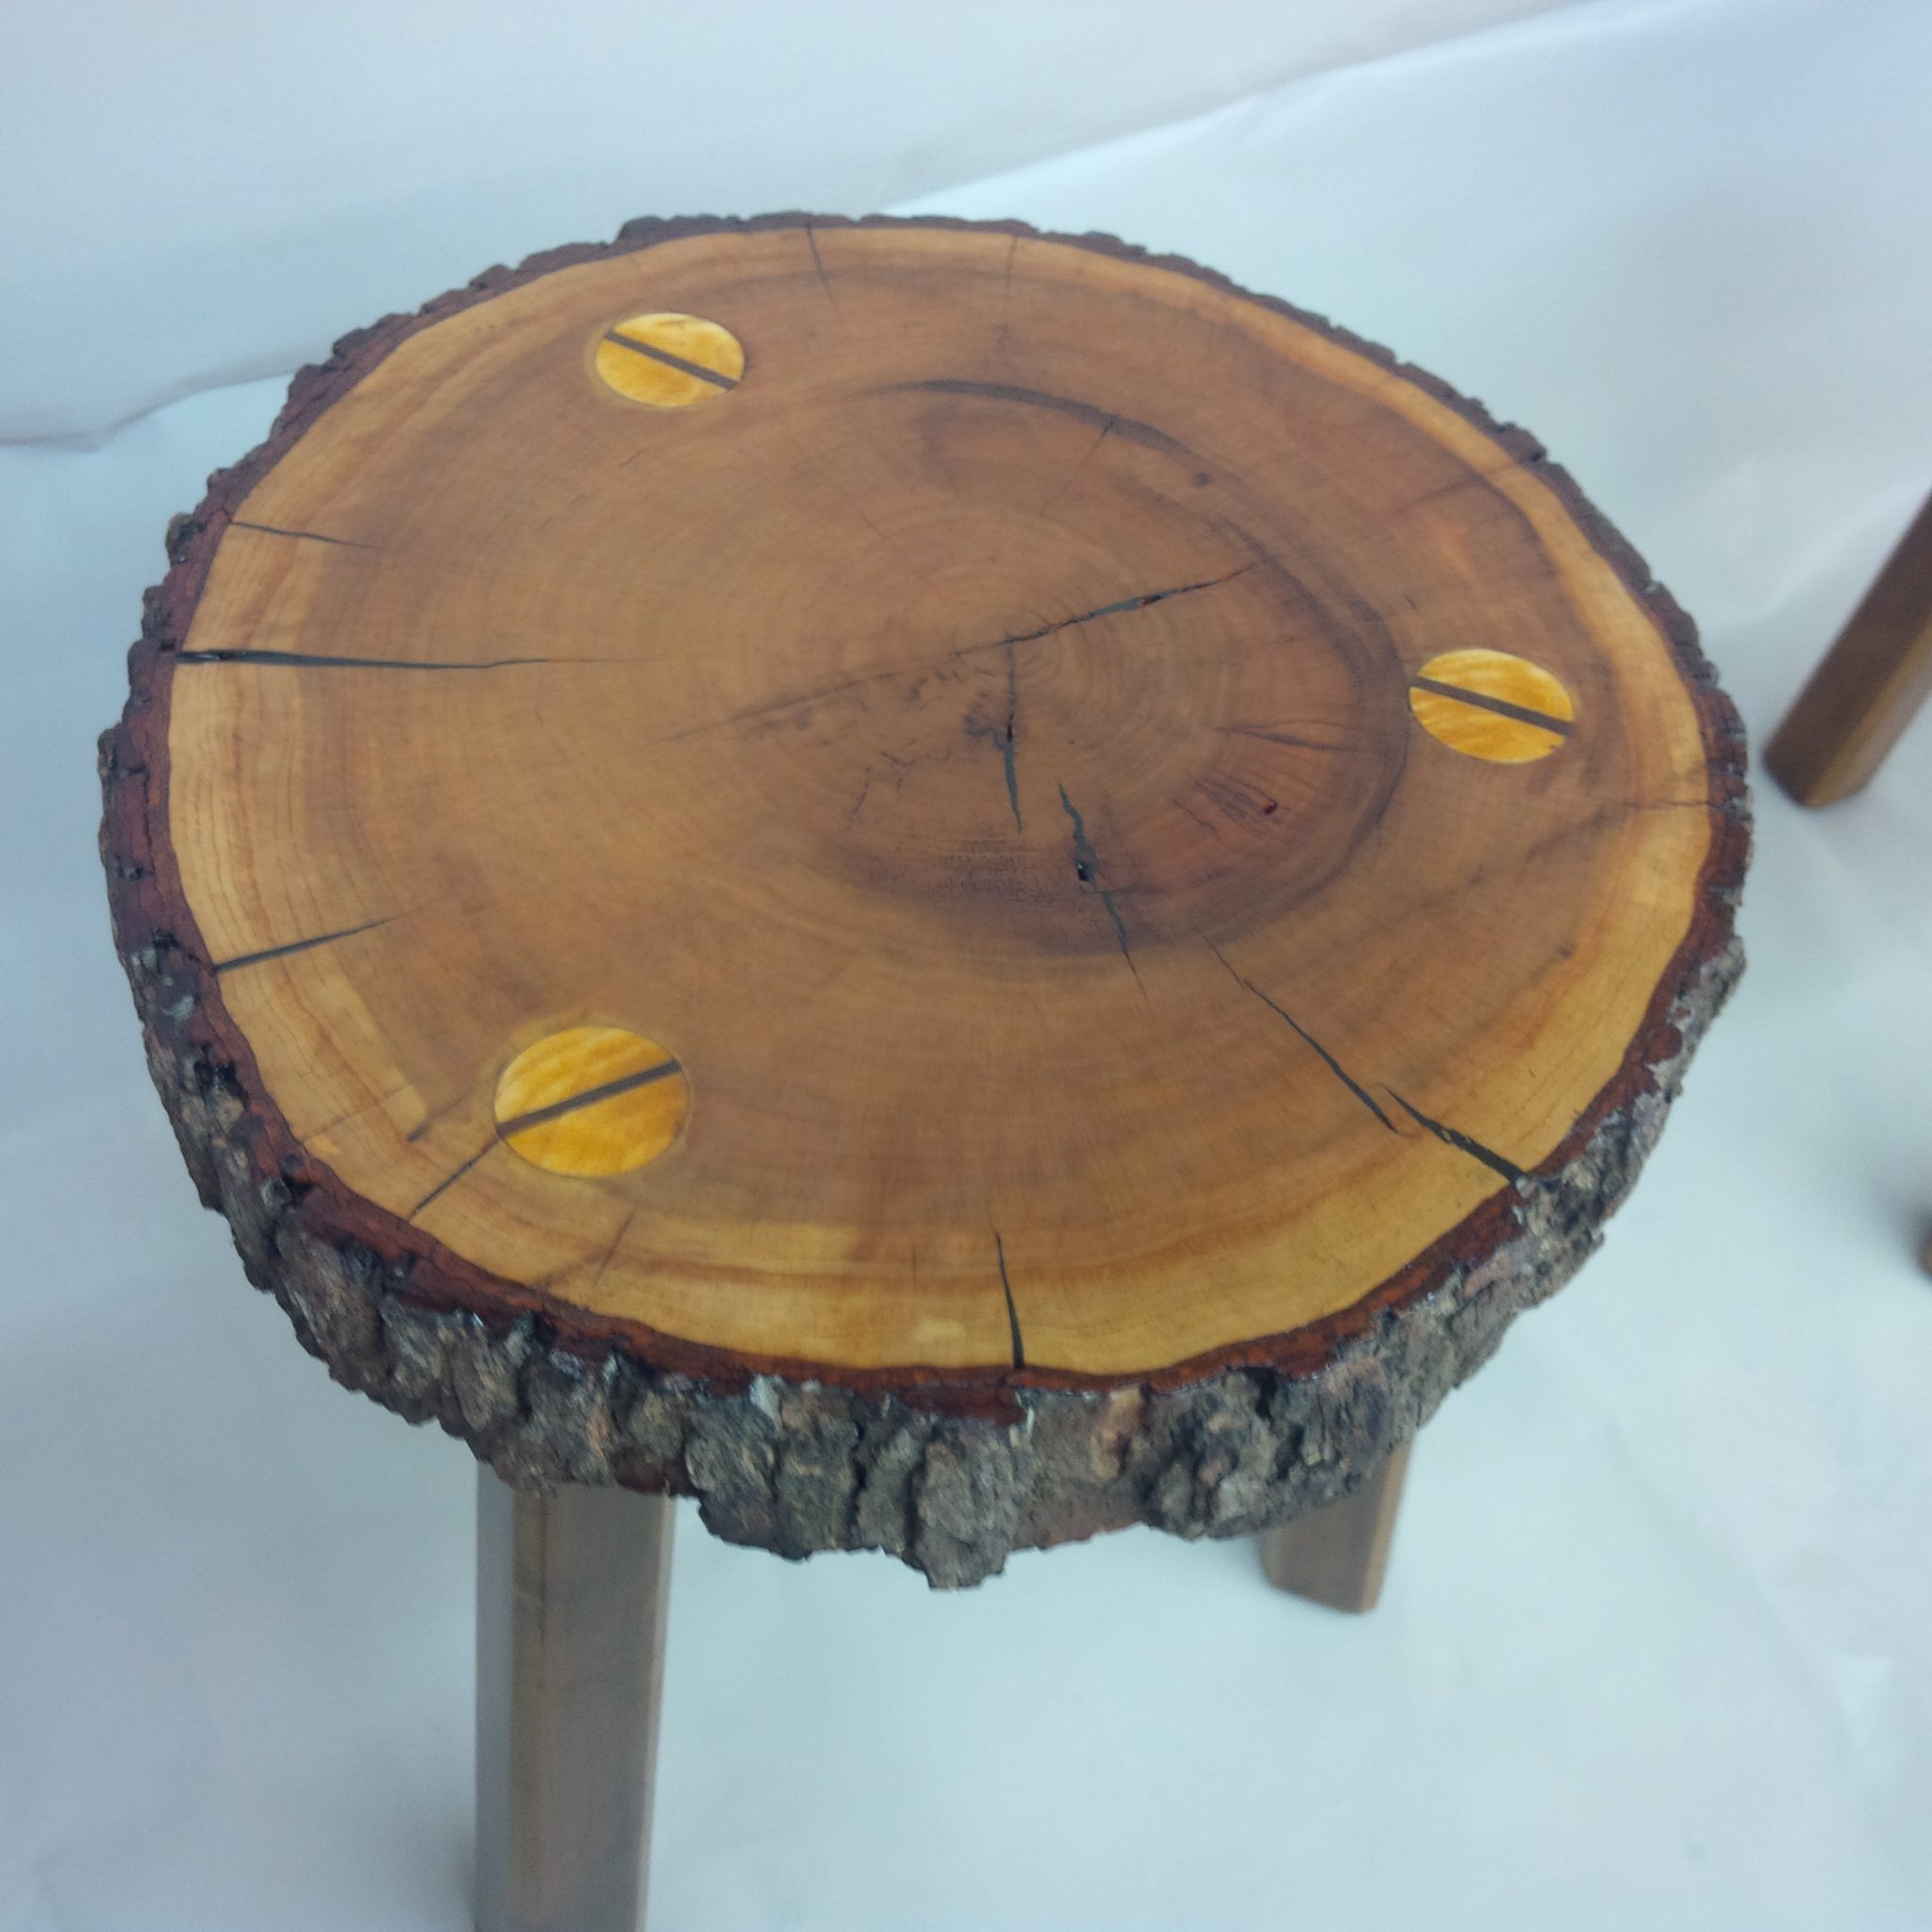 Stools from locally cut pine and filled with epoxy